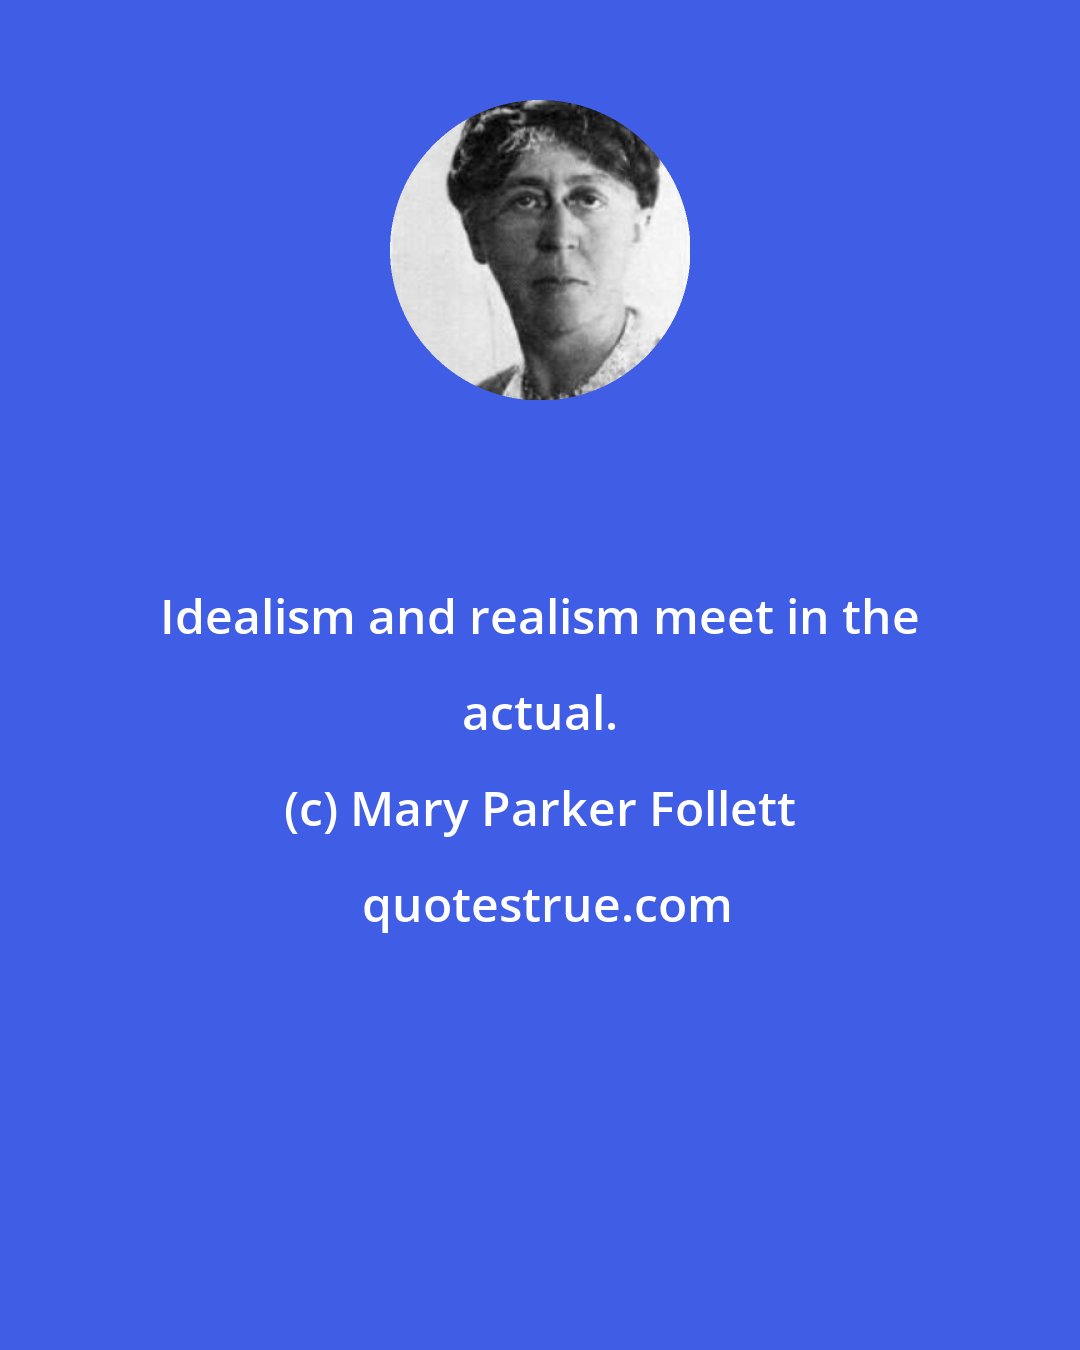 Mary Parker Follett: Idealism and realism meet in the actual.